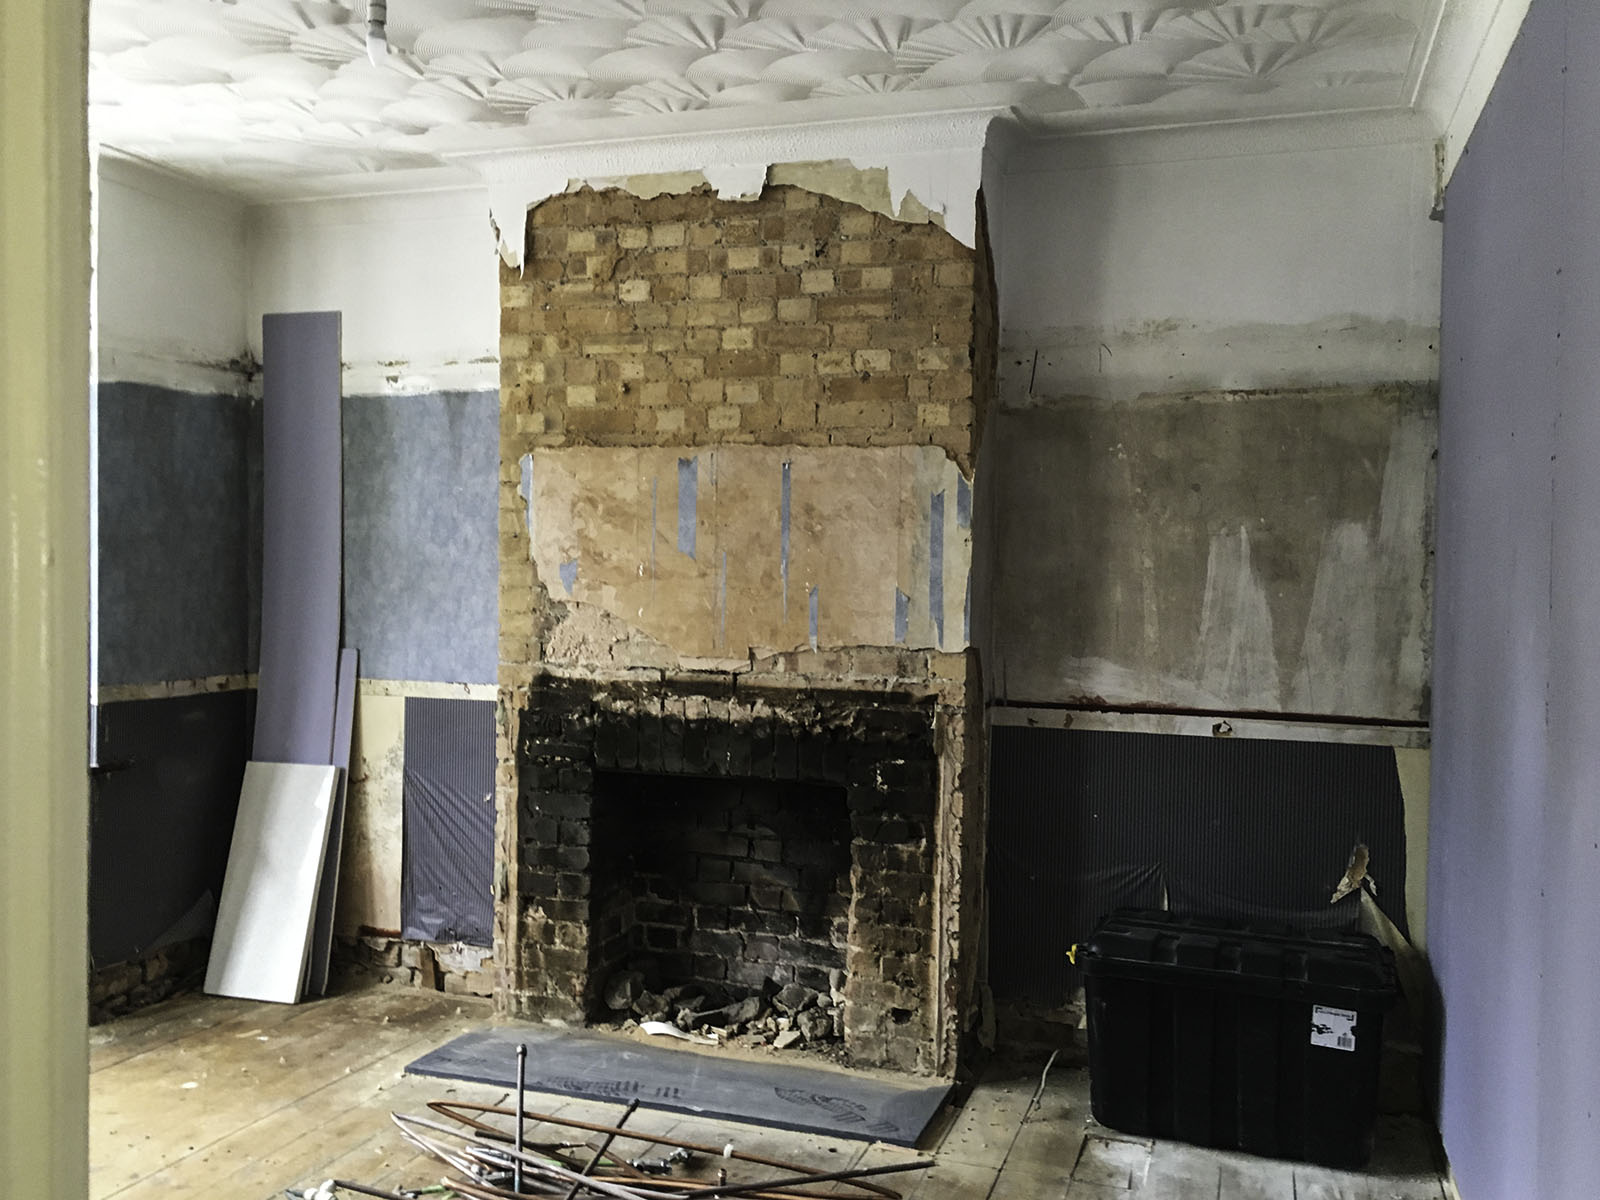 A living room with a large fireplace under construction